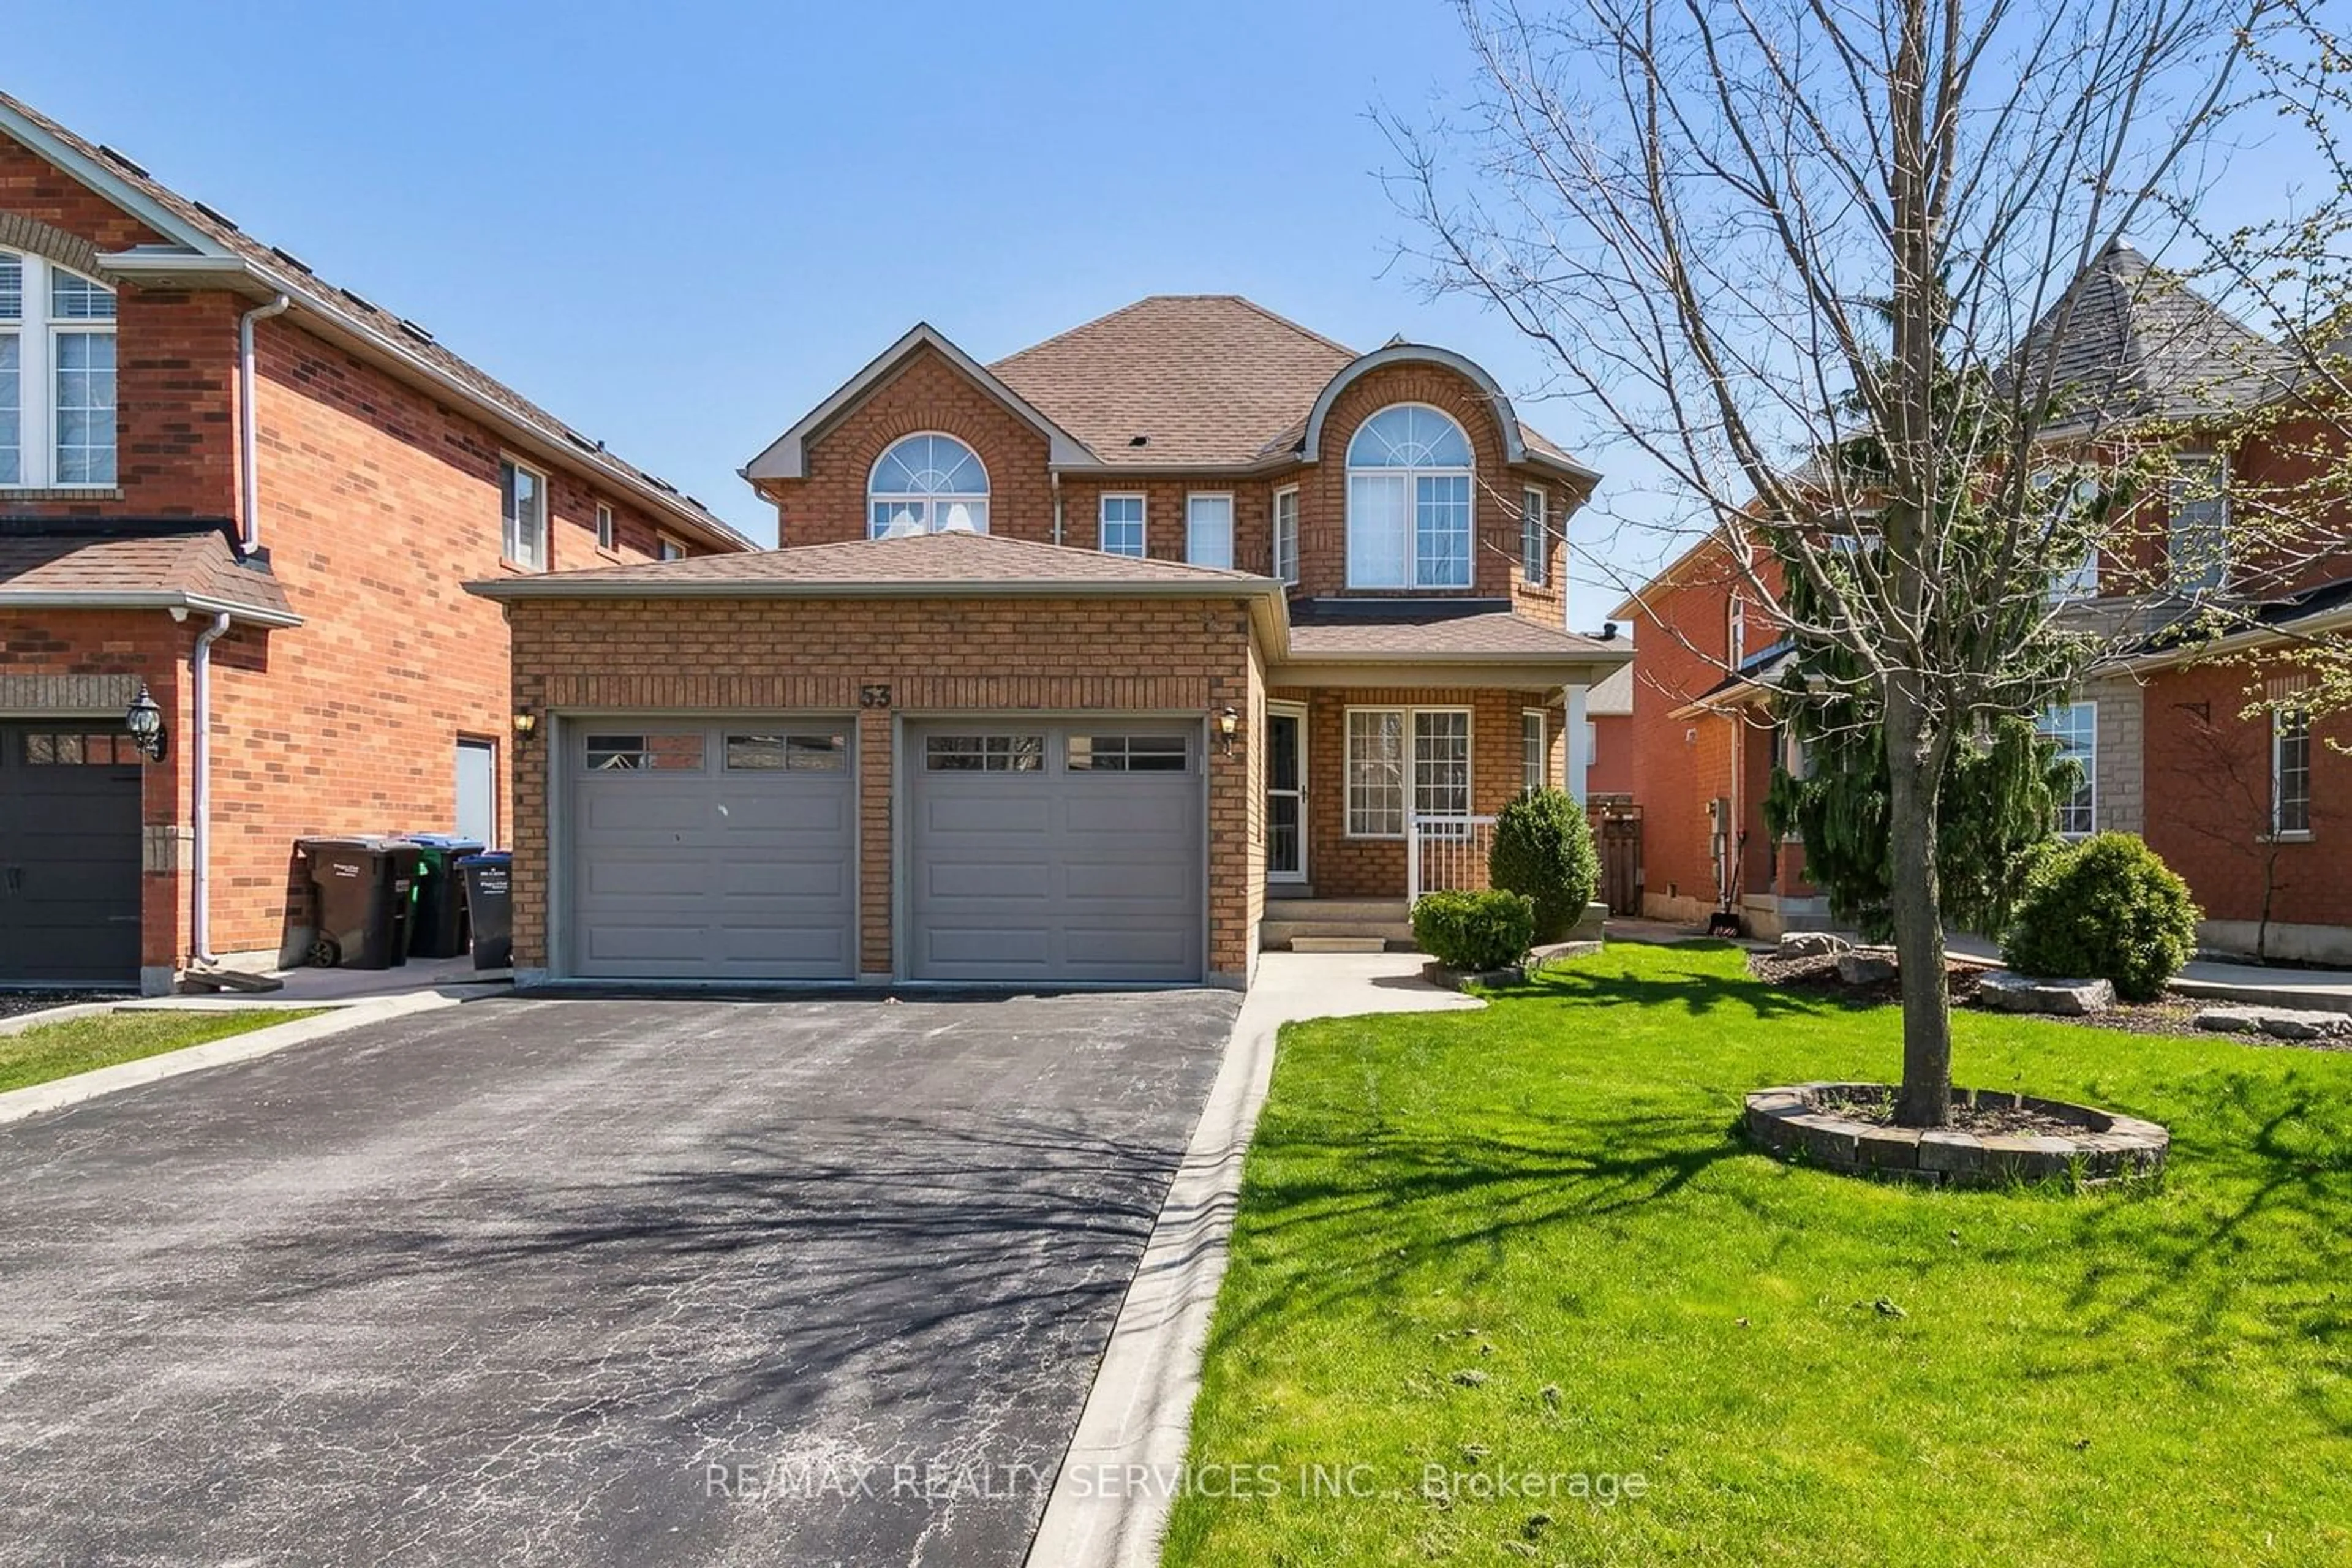 Home with brick exterior material for 53 Baccarat Cres, Brampton Ontario L7A 1K8